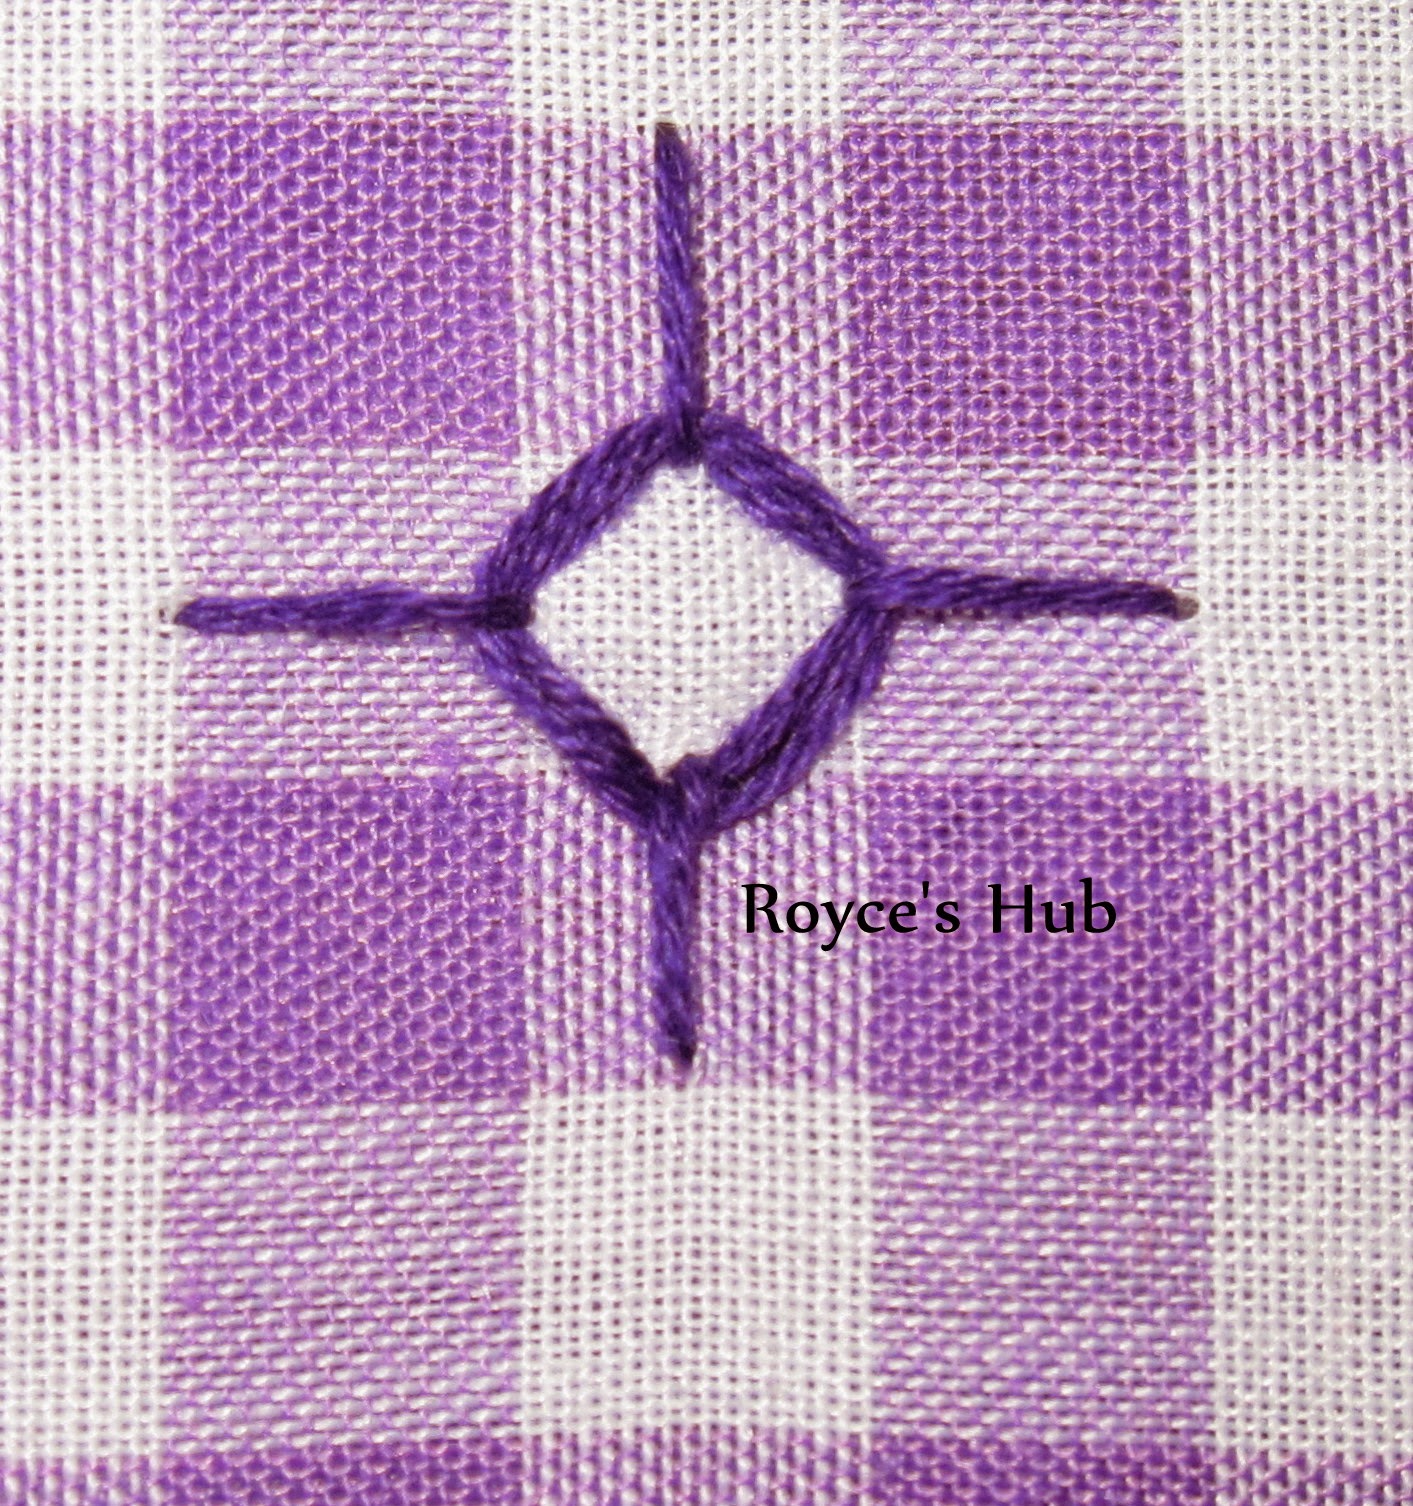 http://roycedavids.blogspot.ae/2014/01/gingham-embroidery-stitches-ii-woven.html